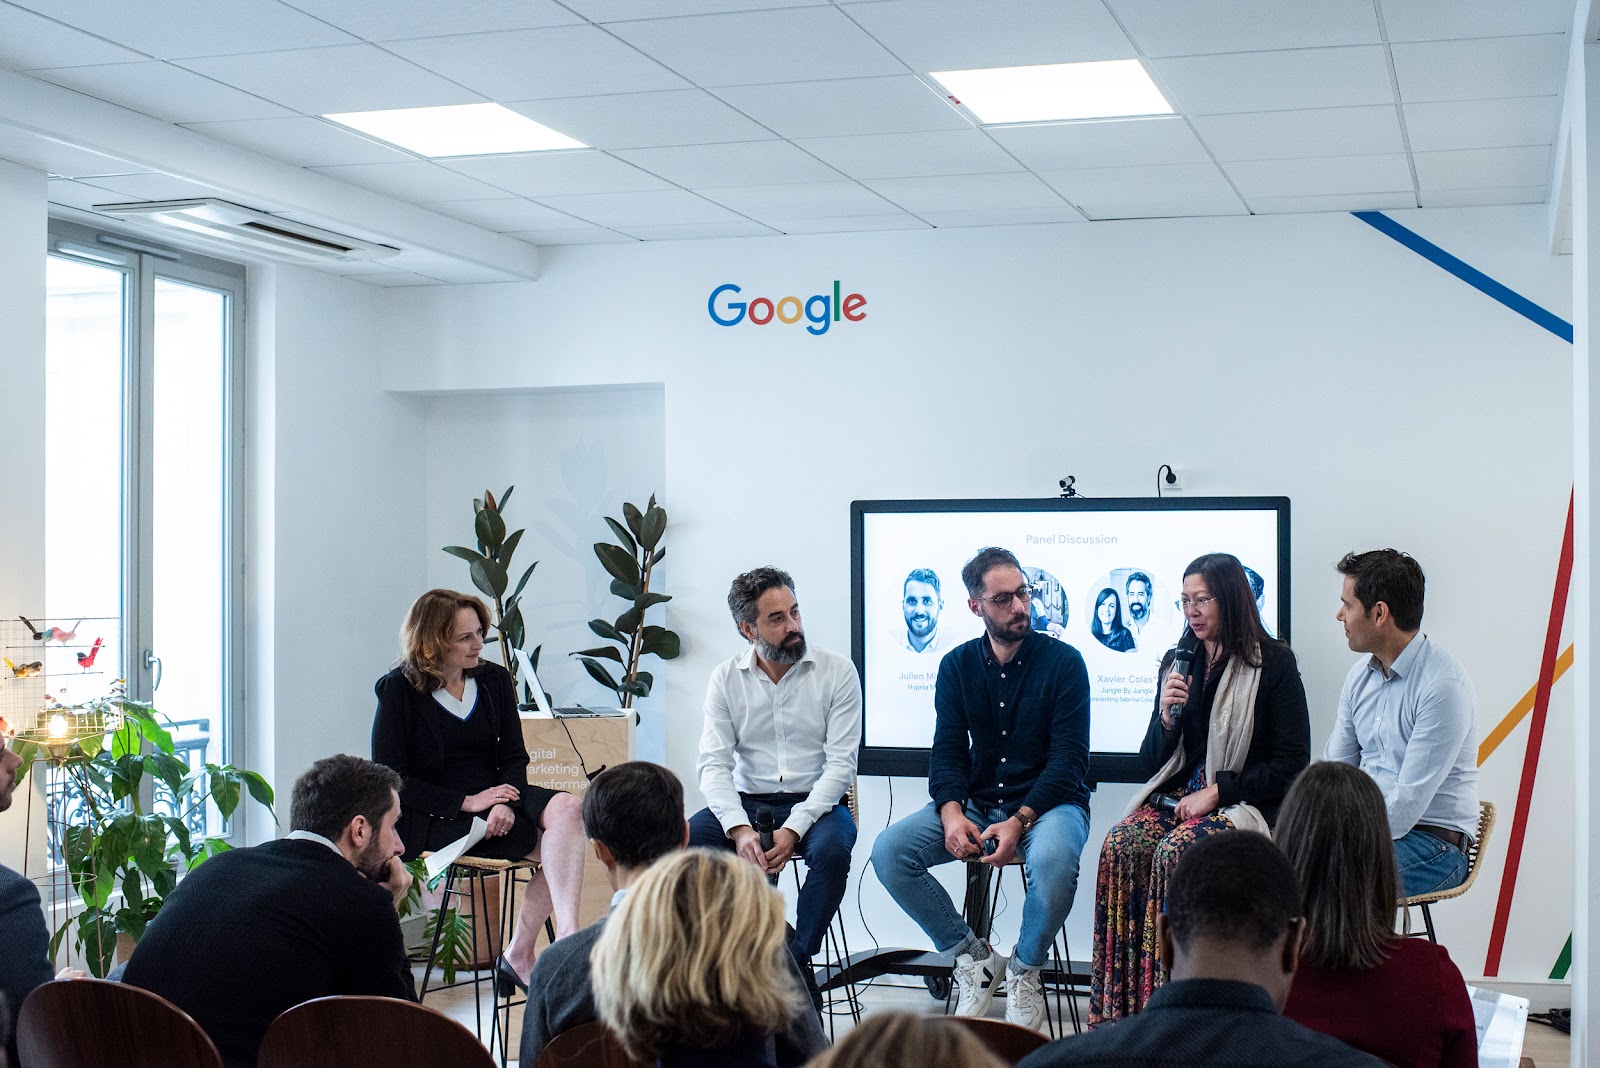 A group of five people are speaking to an audience in a room with the Google logo on the wall